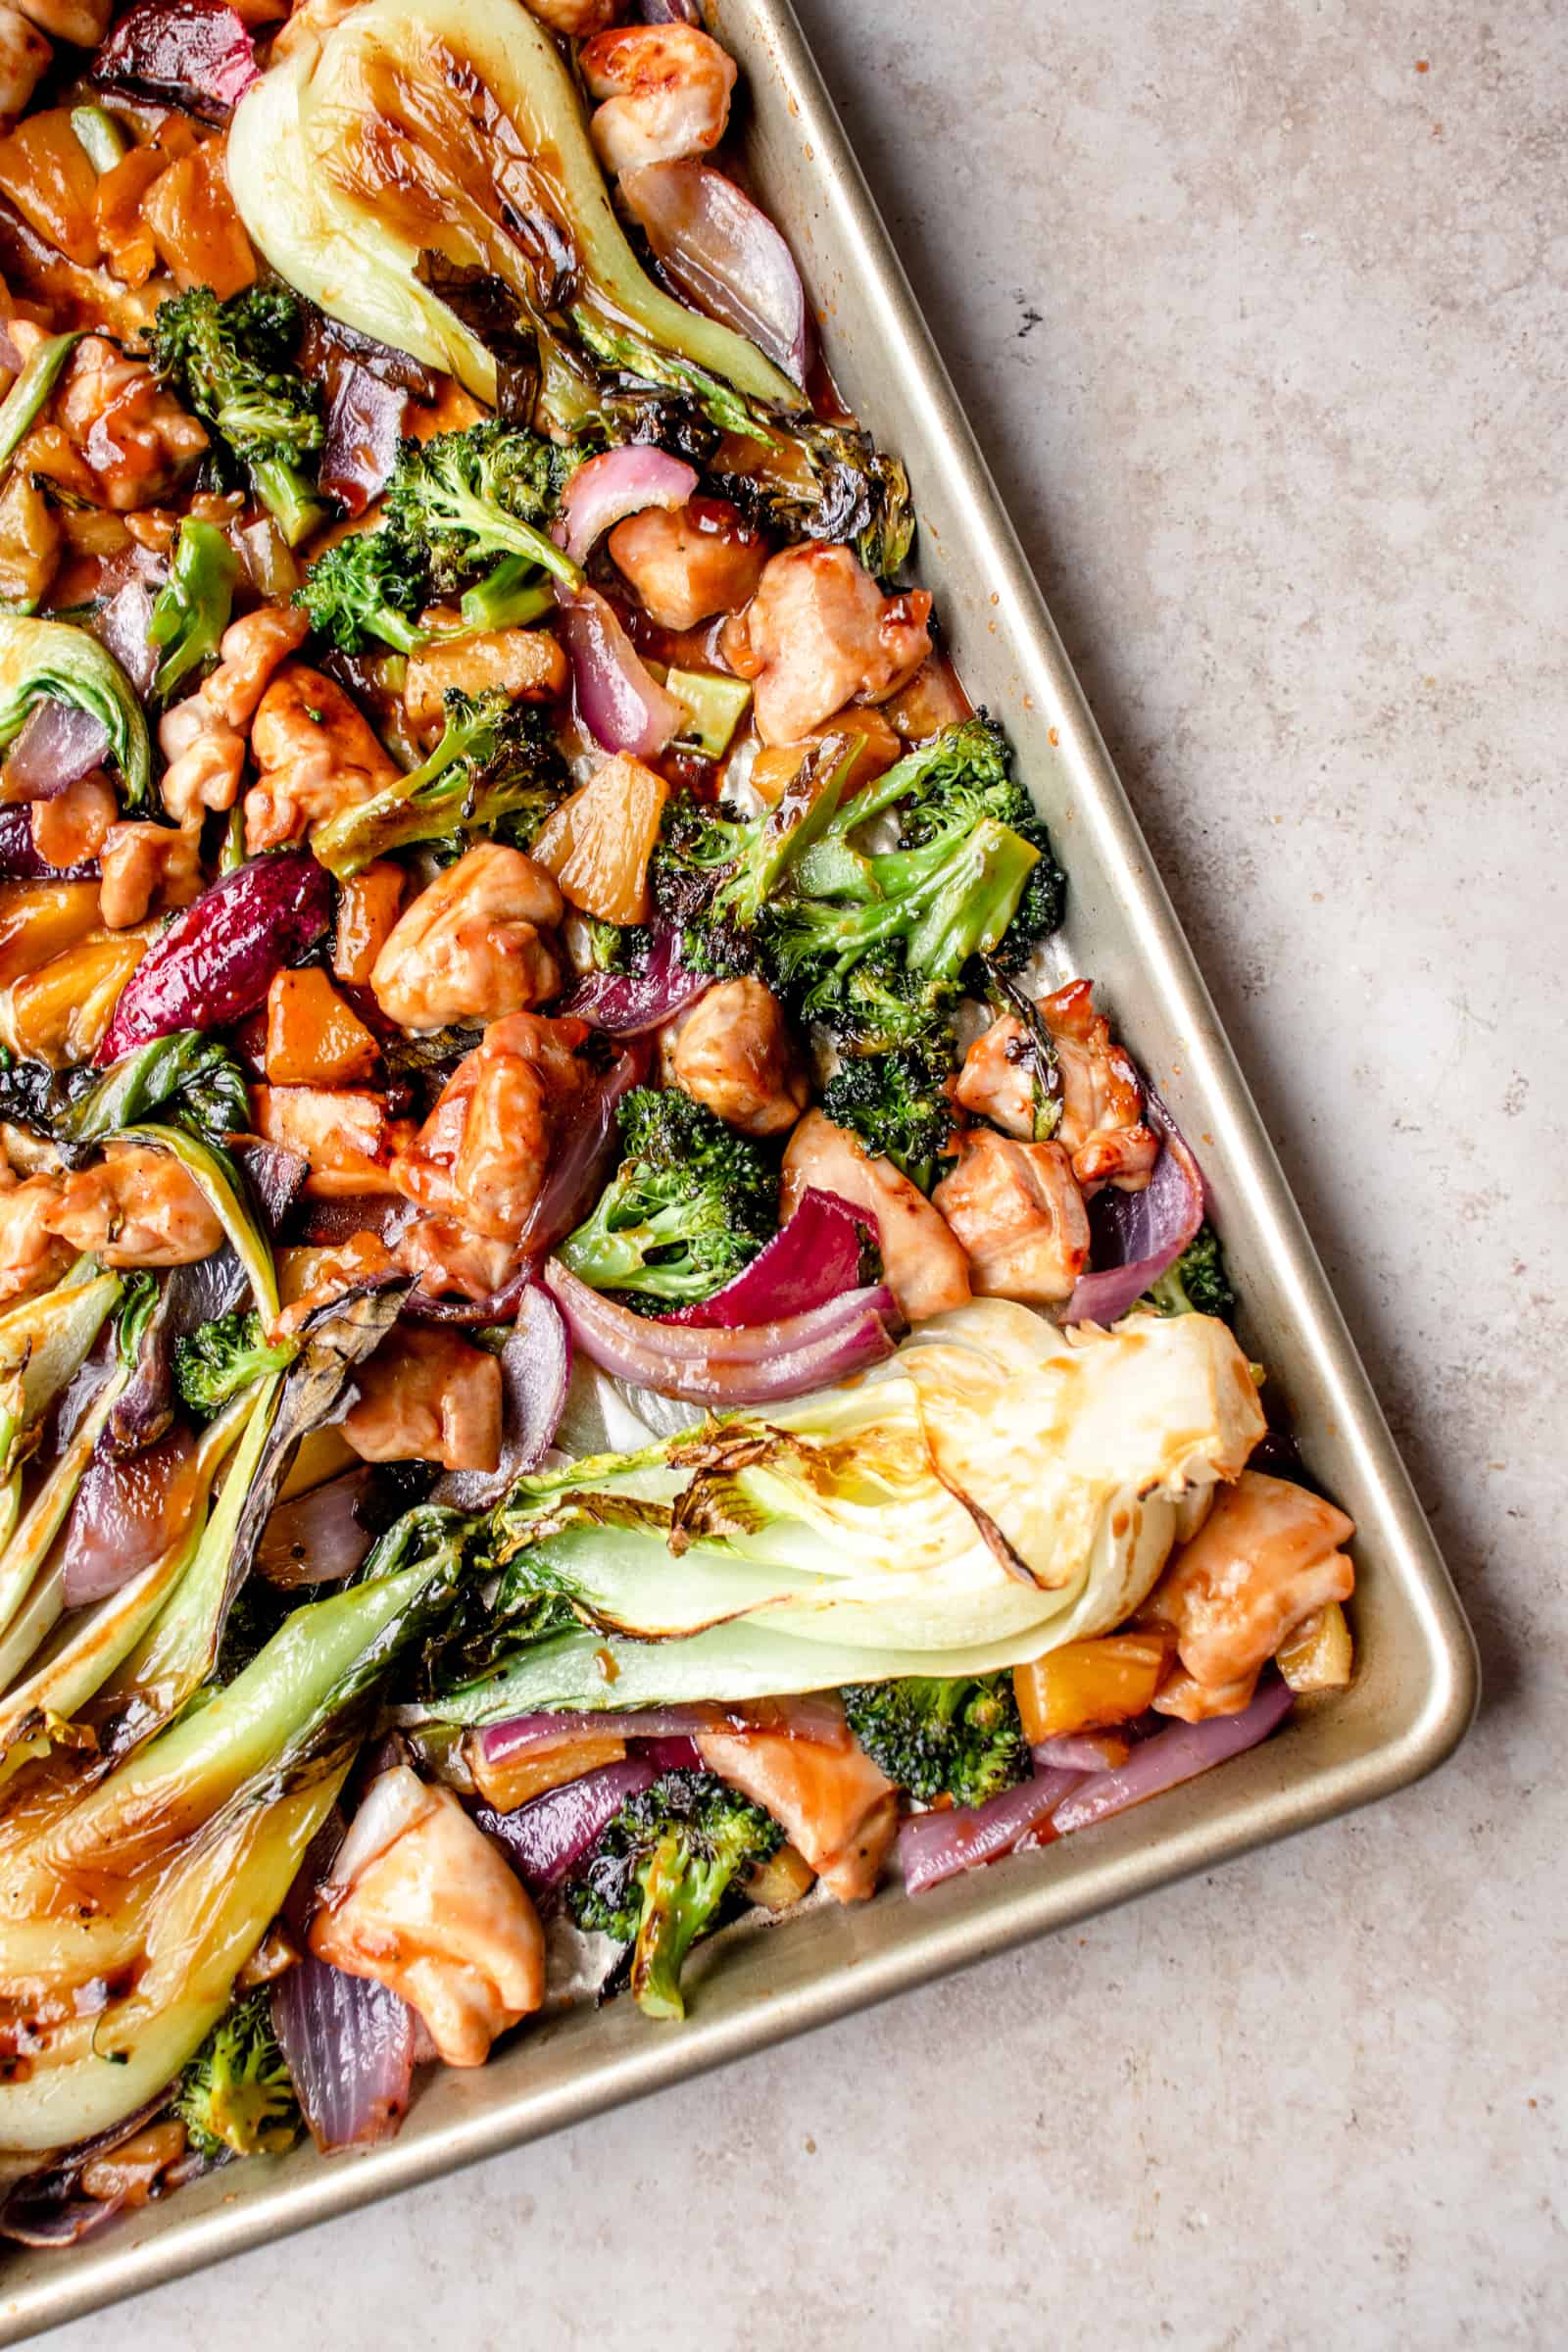 https://healmedelicious.com/wp-content/uploads/2023/01/Sheet-Pan-Paleo-Sweet-and-Sour-Chicken-and-Vegetables-AIP-8.jpg